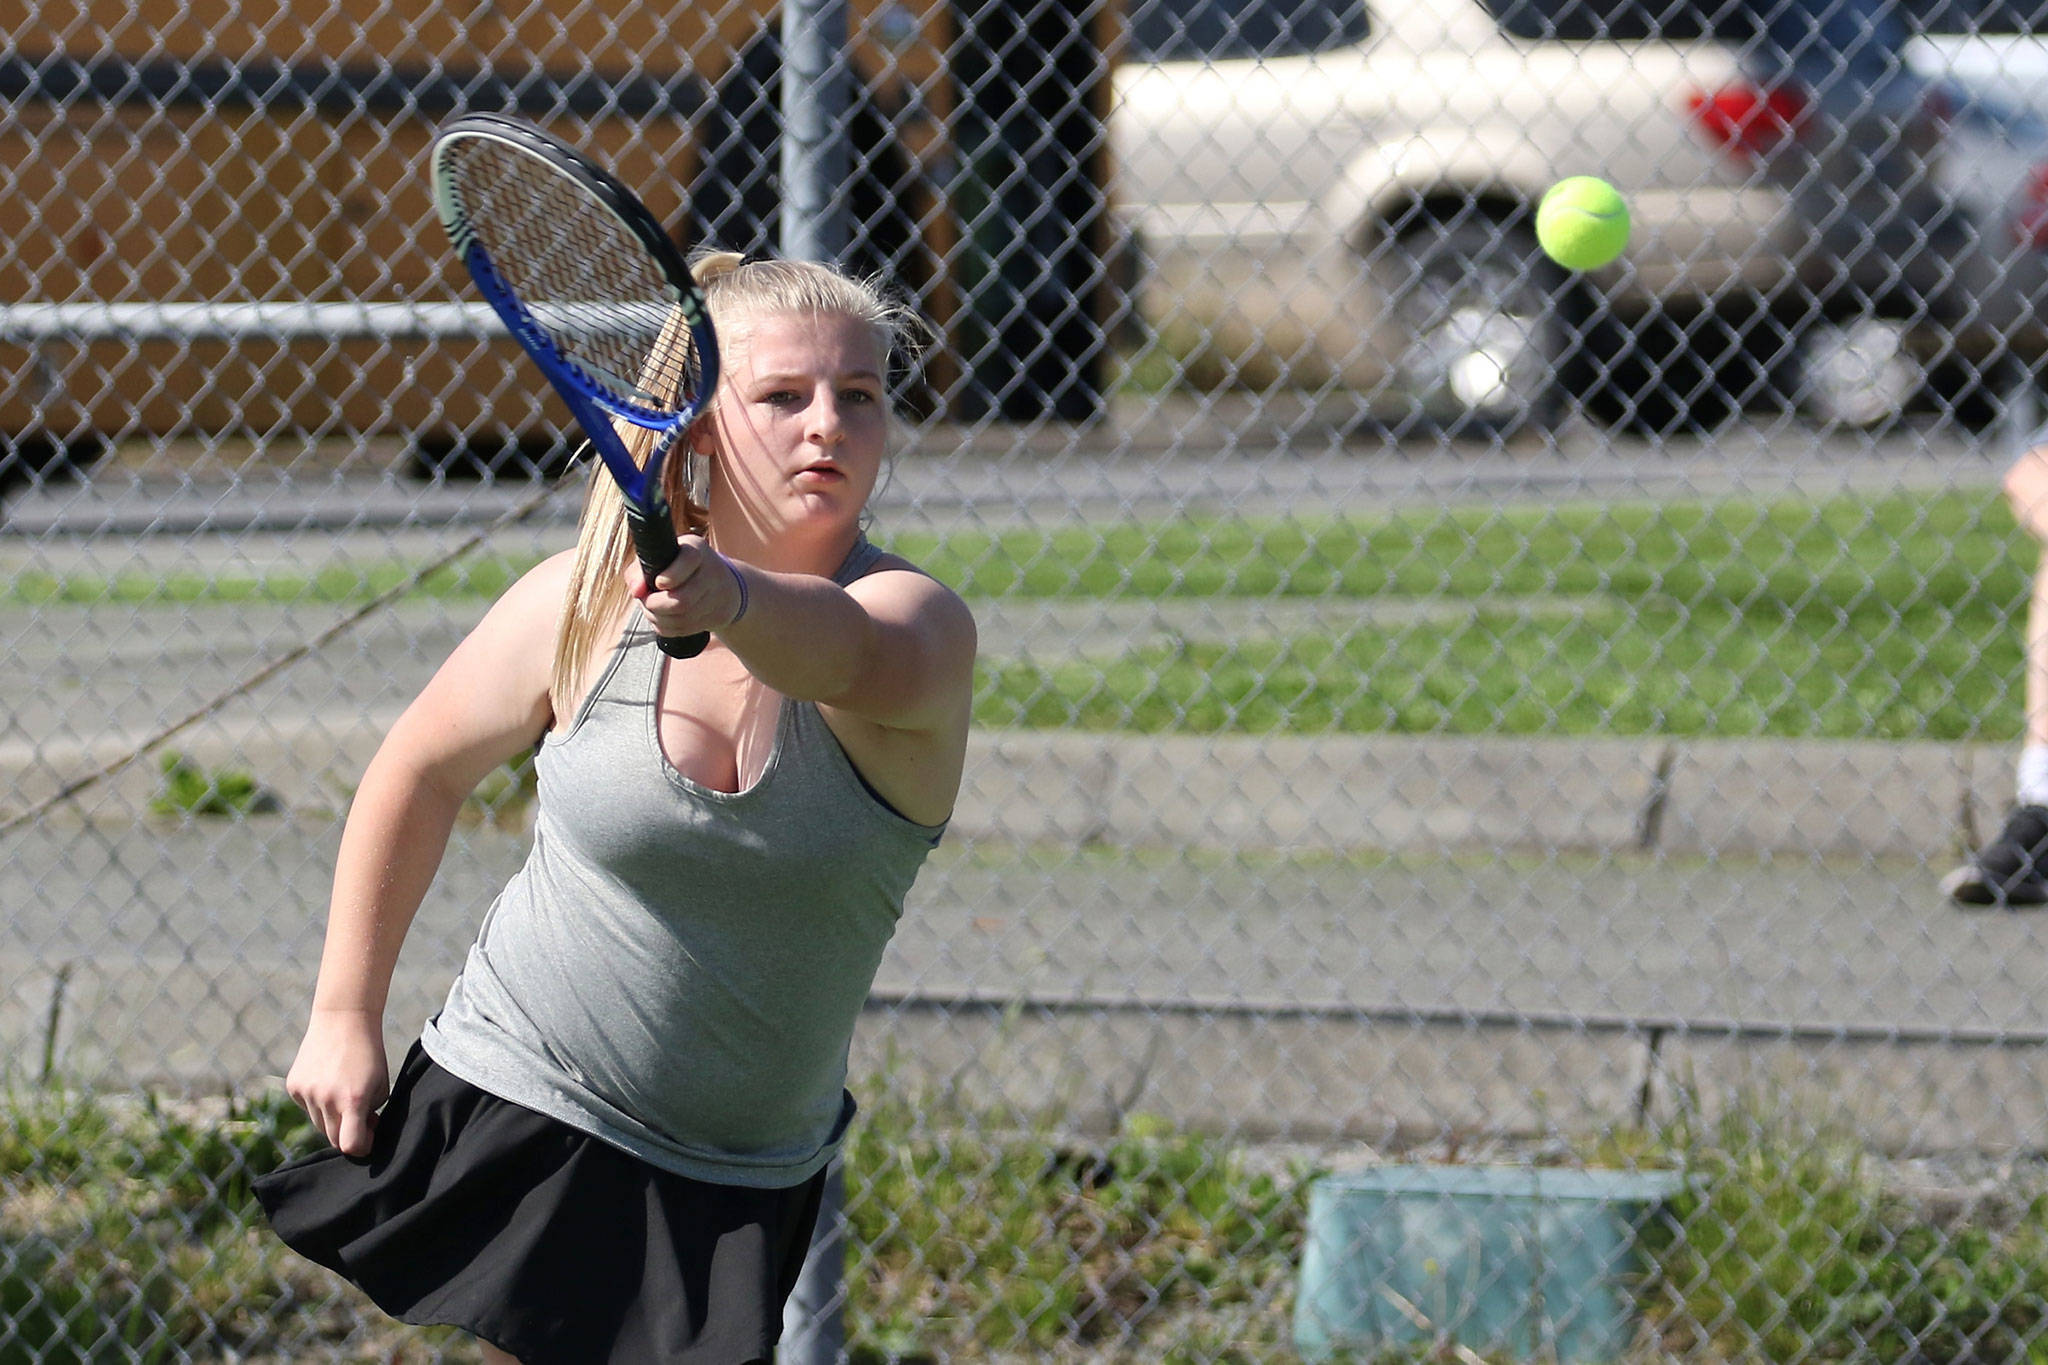 Coupeville’s Avalon Renninger returns a shot in Wednesday’ s match with South Whidbey. (Photo by John Fisken)